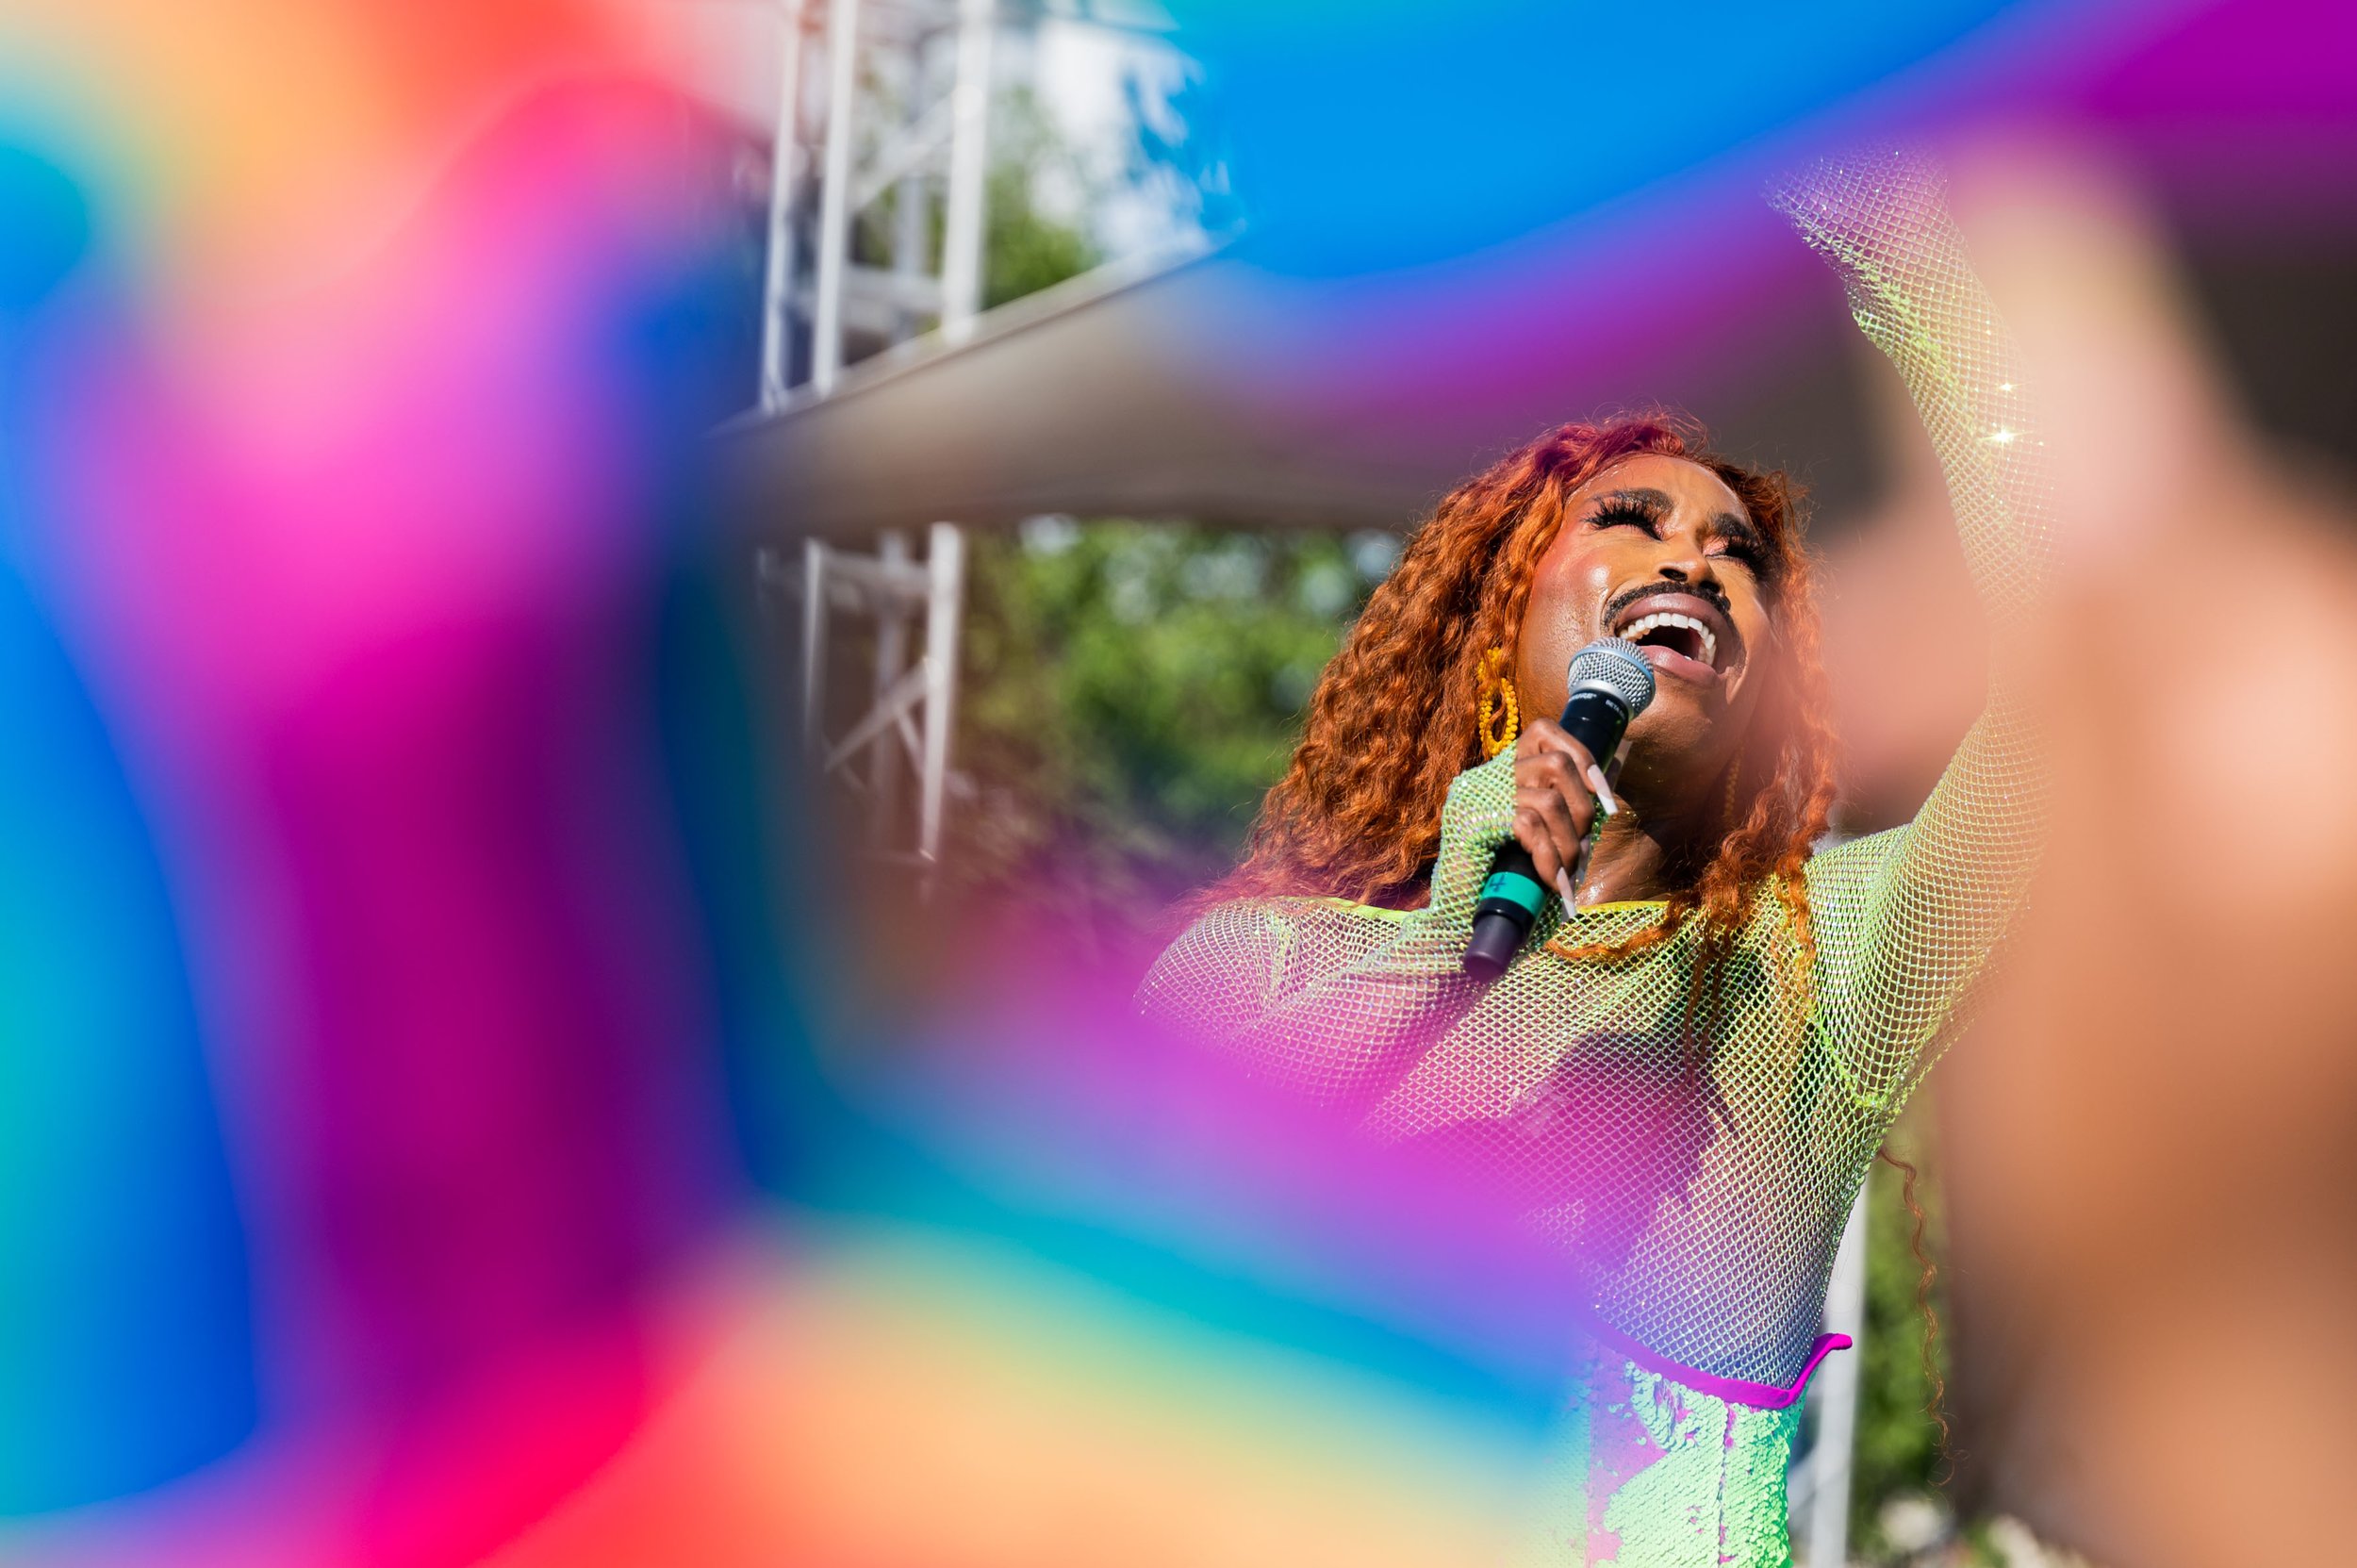  Drag queen and reality television personality Mo Heart performs on the mainstage at Hampton Roads PrideFest at Town Point Park in Norfolk, Va. on Saturday, June 24, 2023. Mo Heart has been featured as a contestant on RuPaul's Drag Race. (Tess Crowle